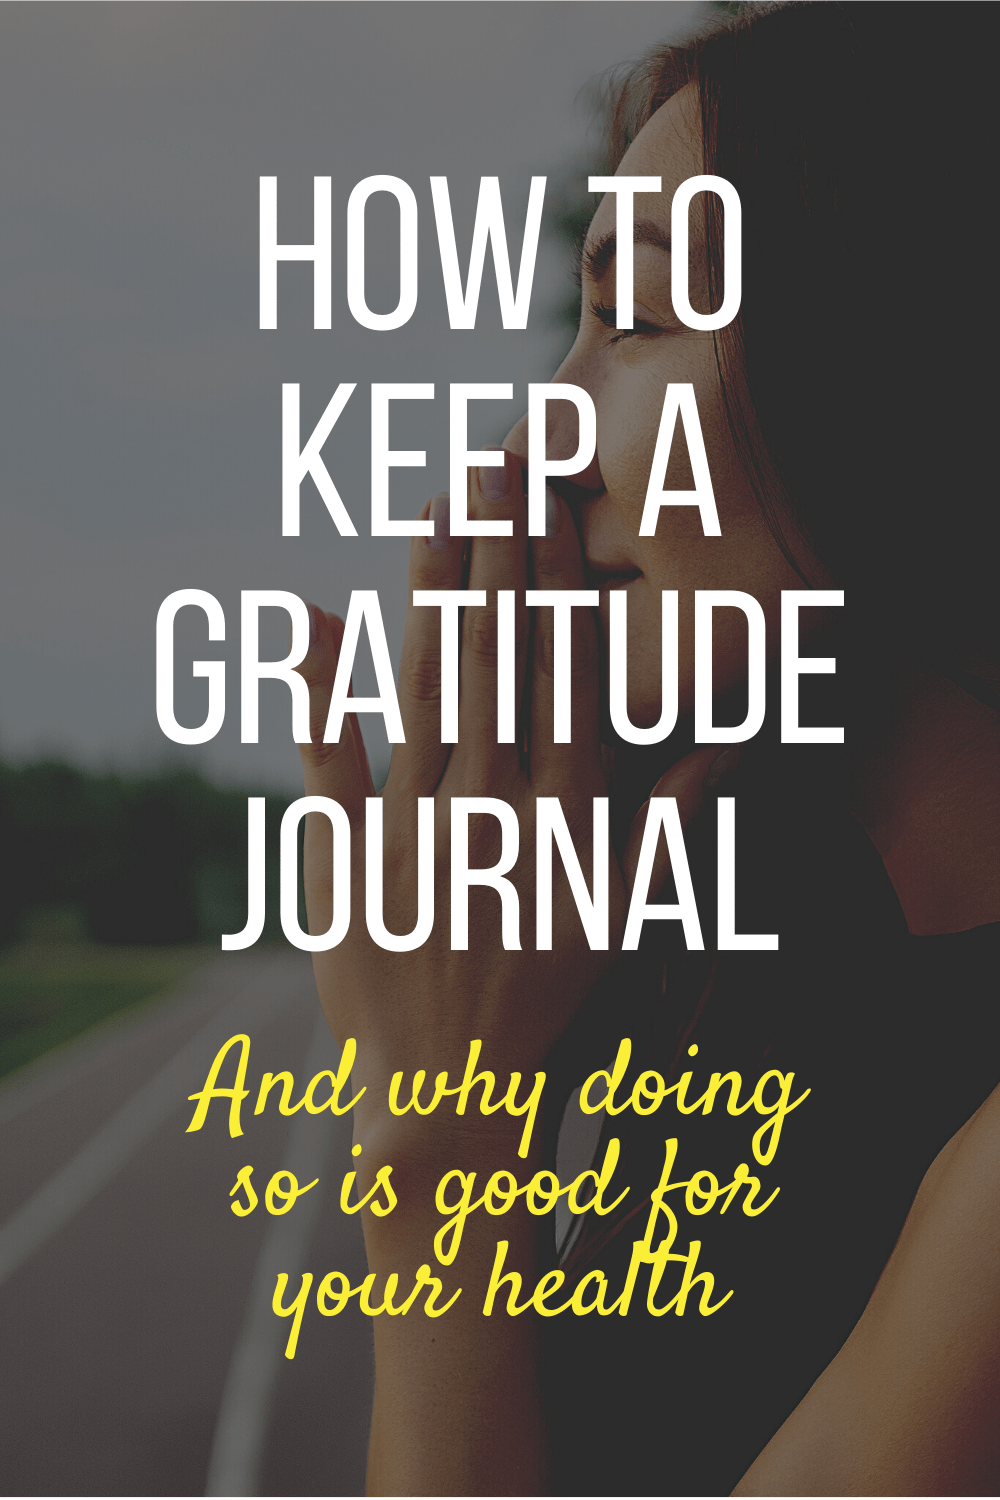 Being grateful is good for your mental and physical health - so find out how to keep a gratitude journal and get started today!